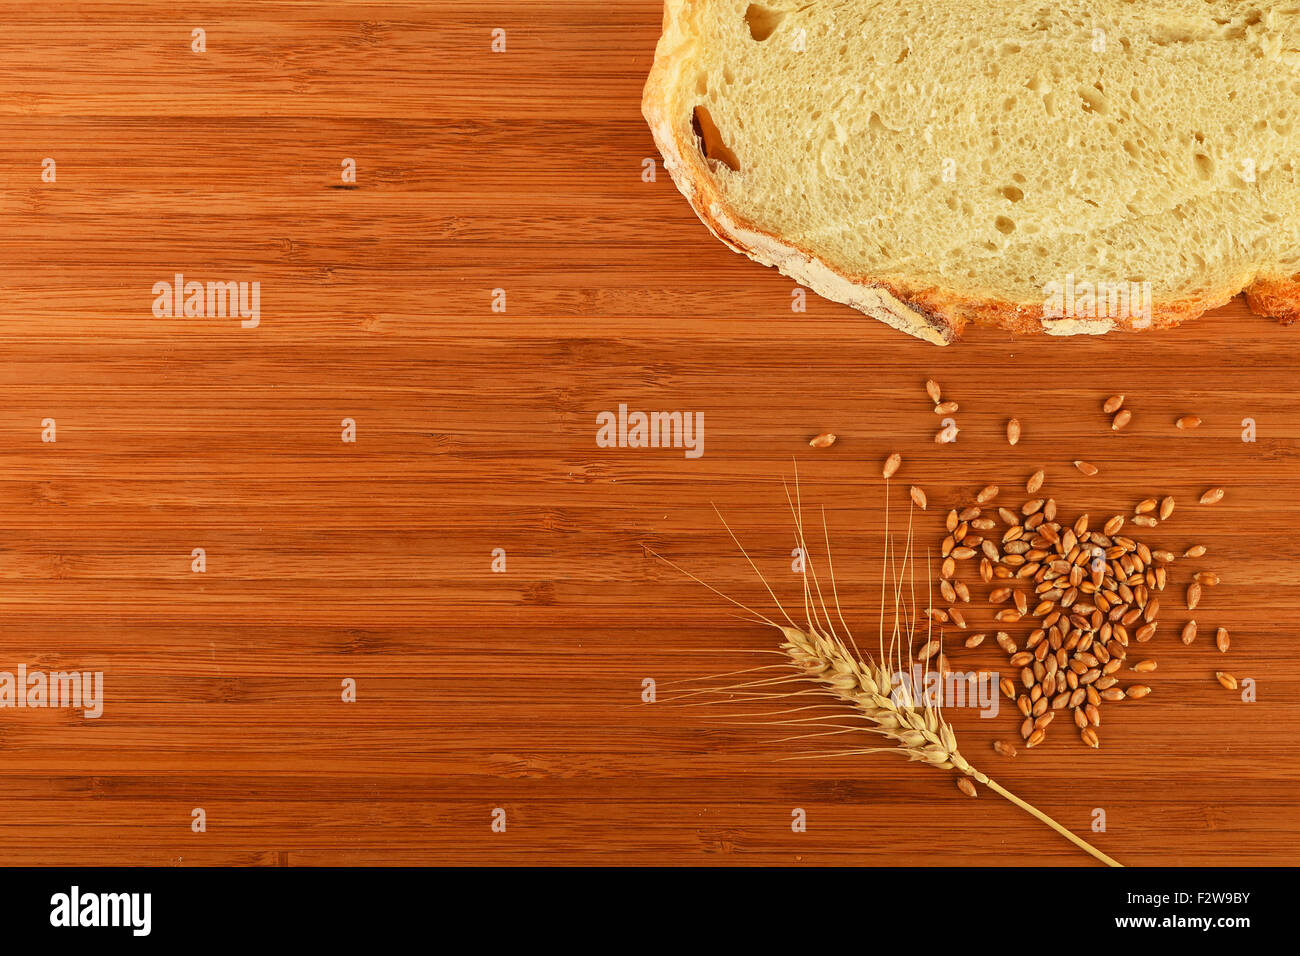 Wooden bamboo cutting board with one wheat ear, handful of ripe grains and a slice of bread - add your text Stock Photo